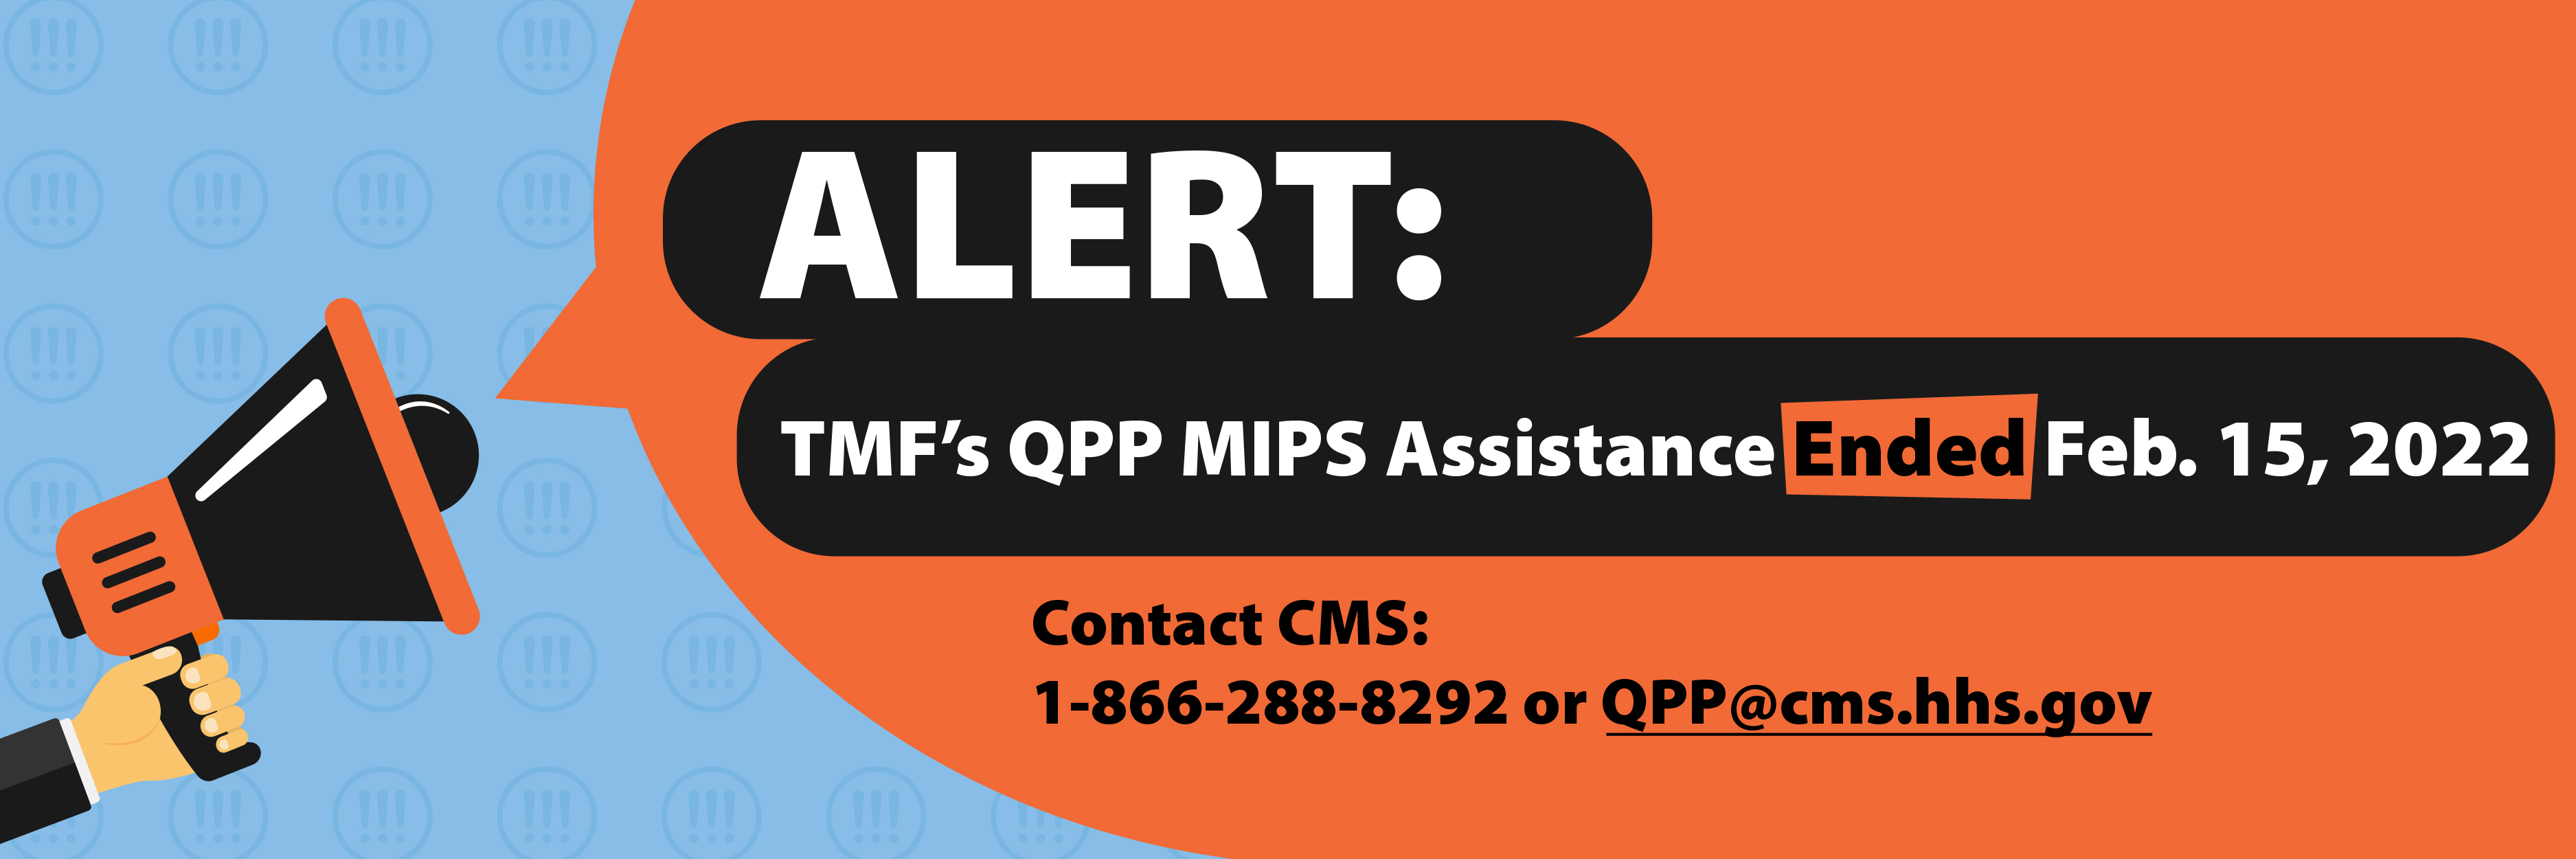 TMF's QPP MIPS Assistance Ends February 15, 2022